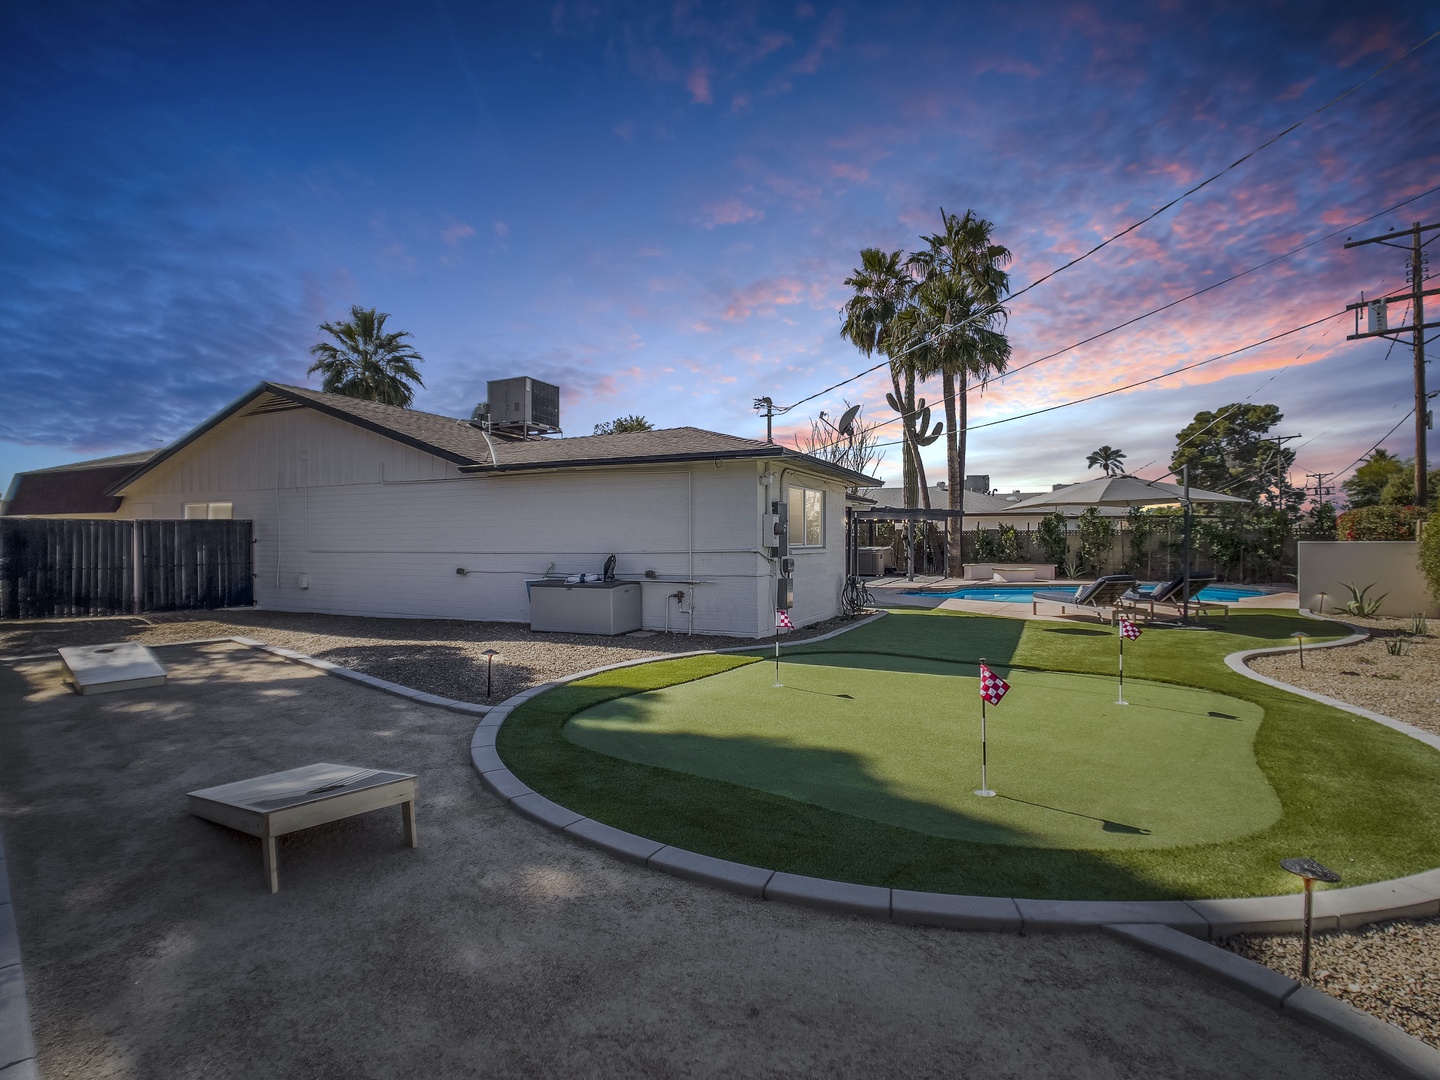 Putting green and yard games